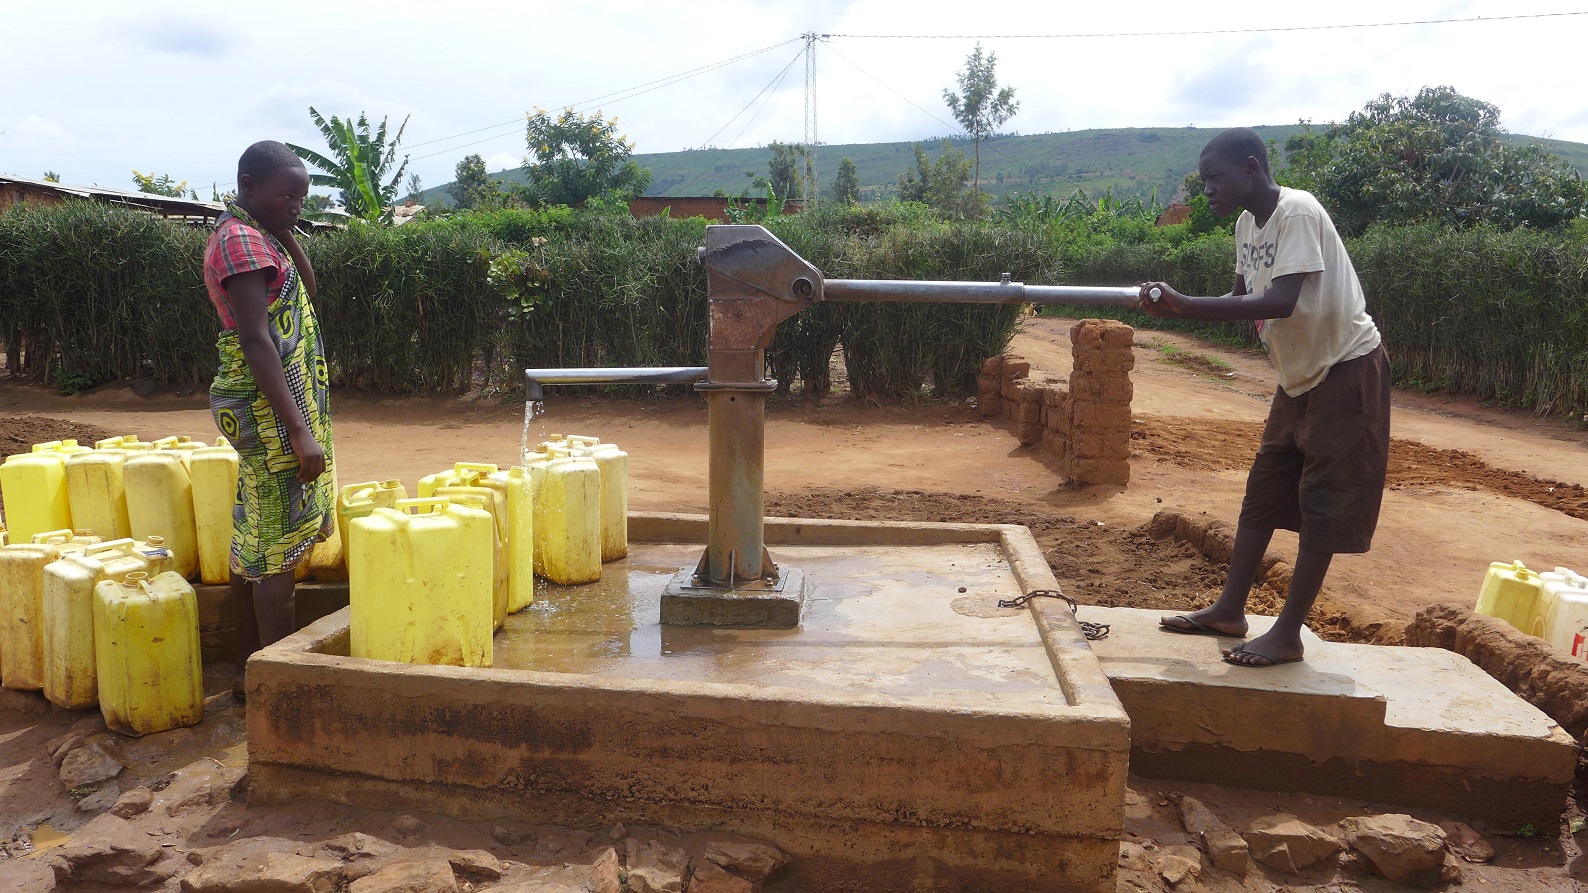 People fetch water from a borehole in rural Rwanda. Access to water is a key a part of economic development. 